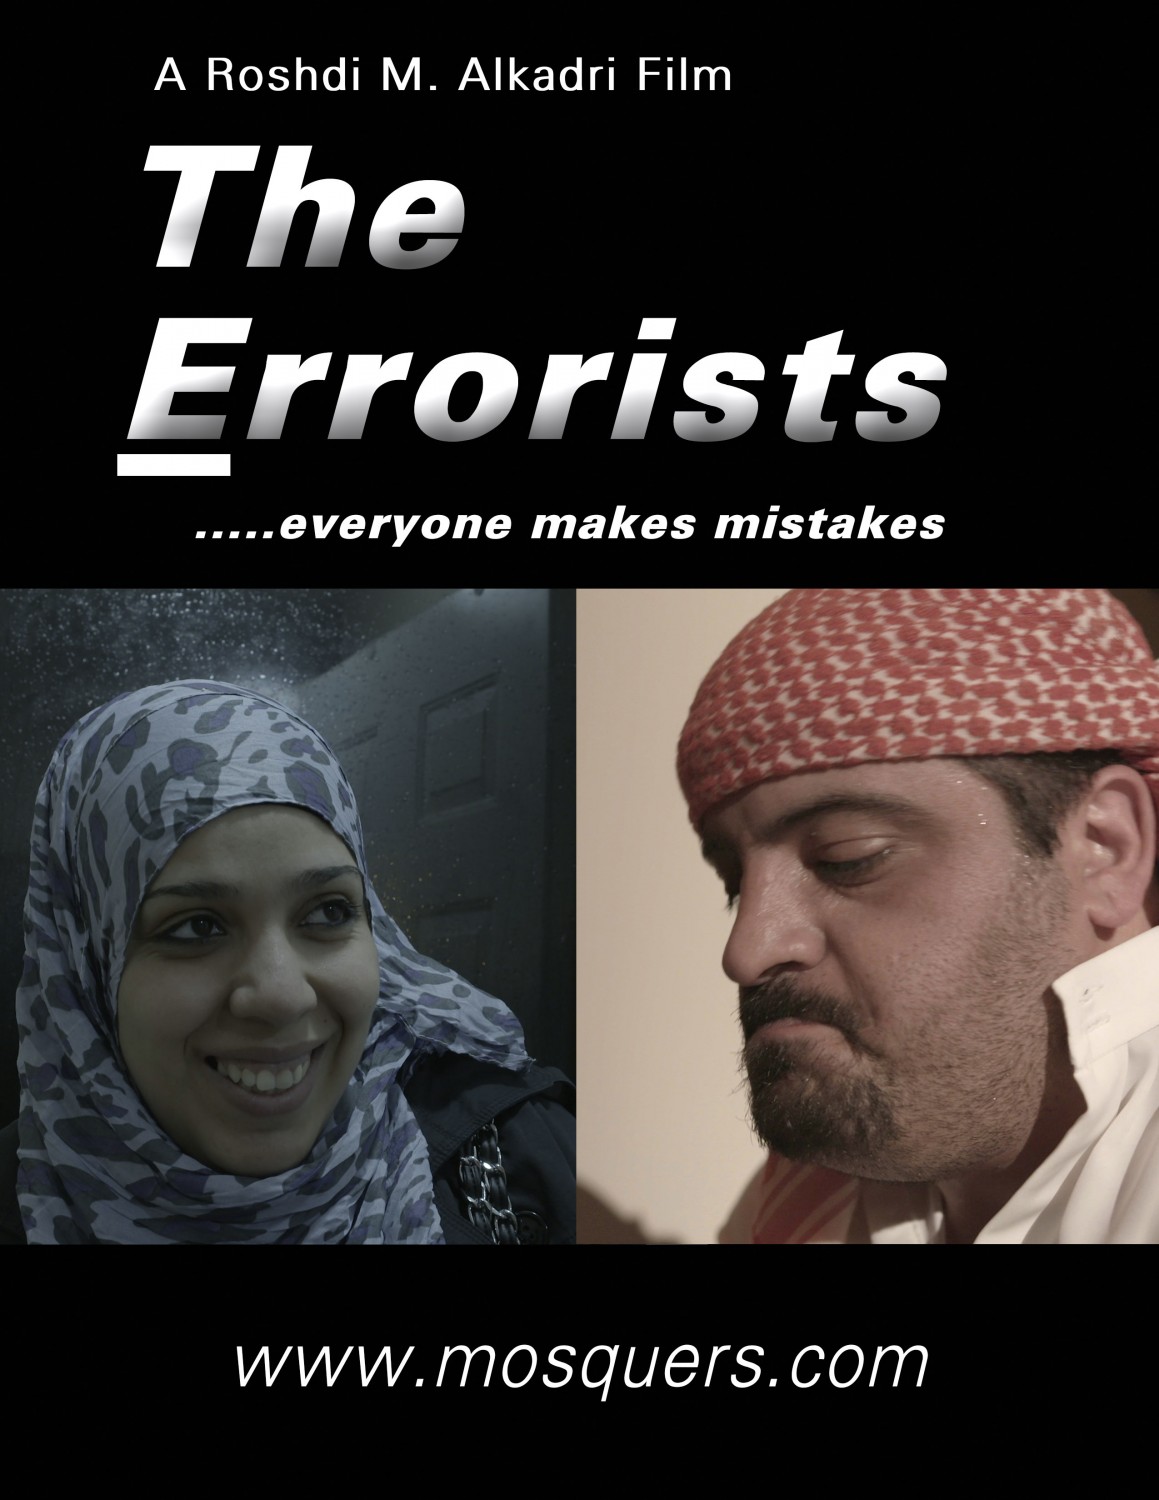 Extra Large Movie Poster Image for The Errorists